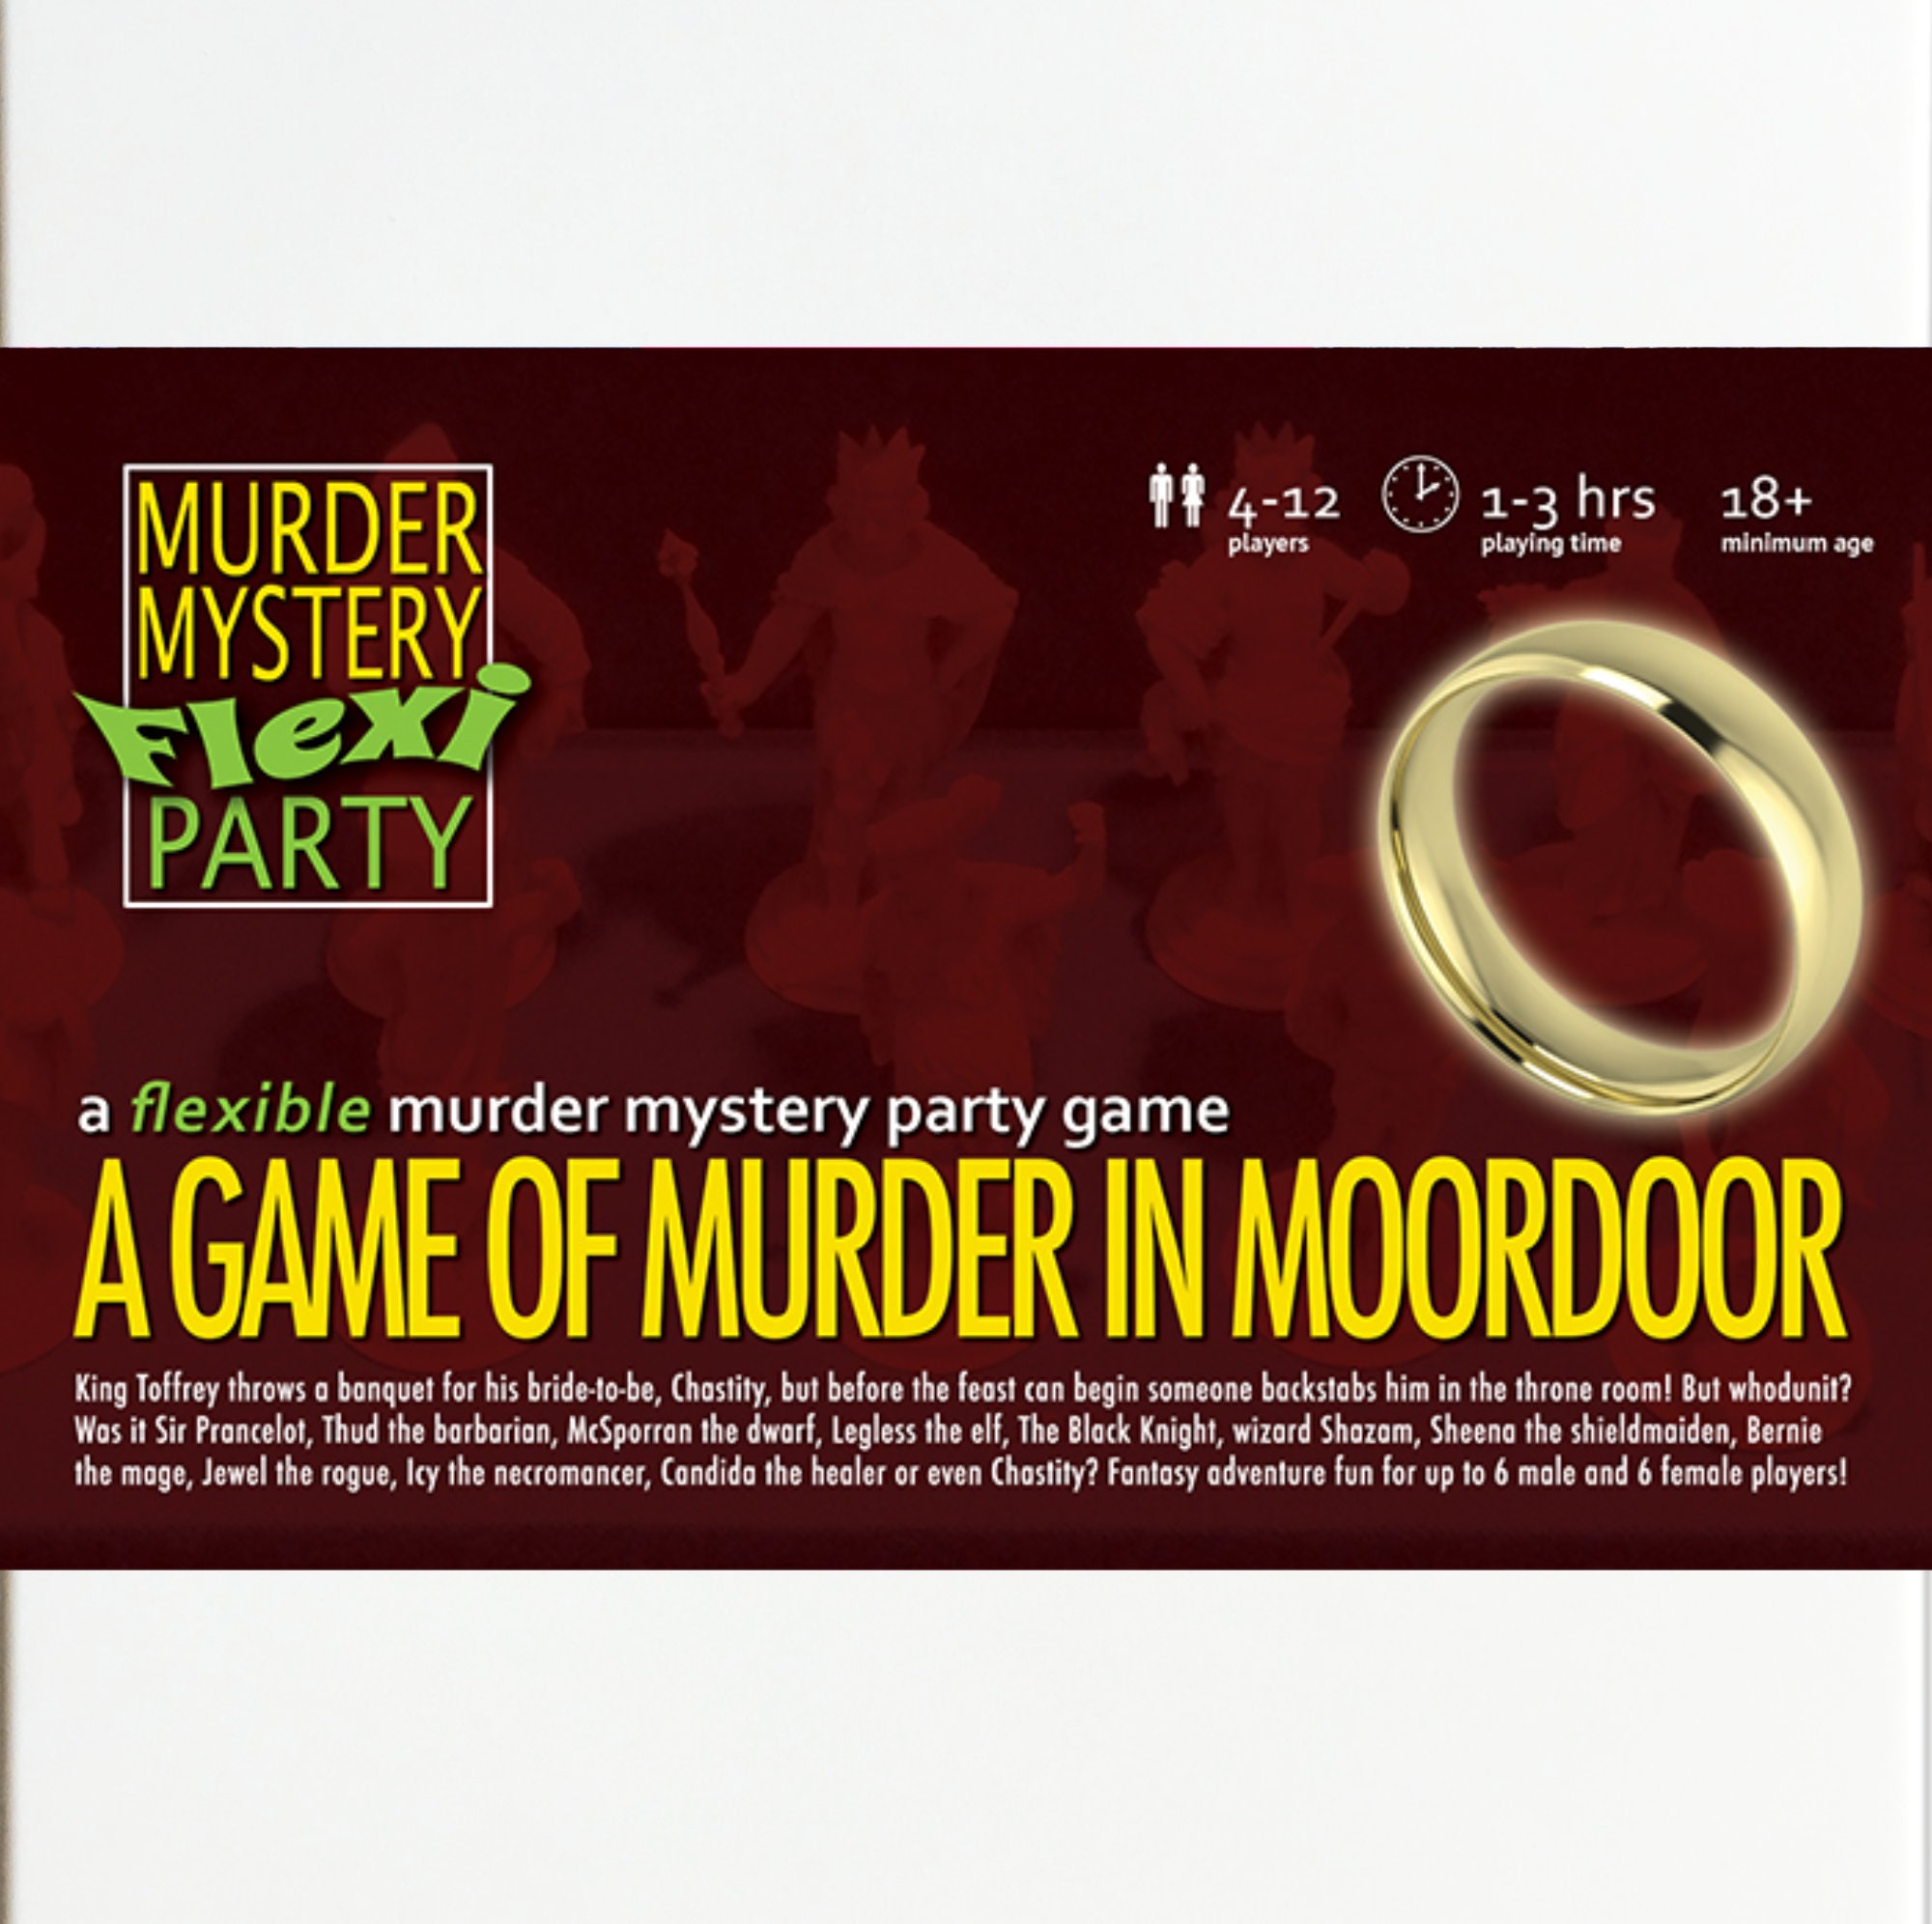 Epic Fantasy 4-12 Player Flexible Murder Mystery Dinner Party